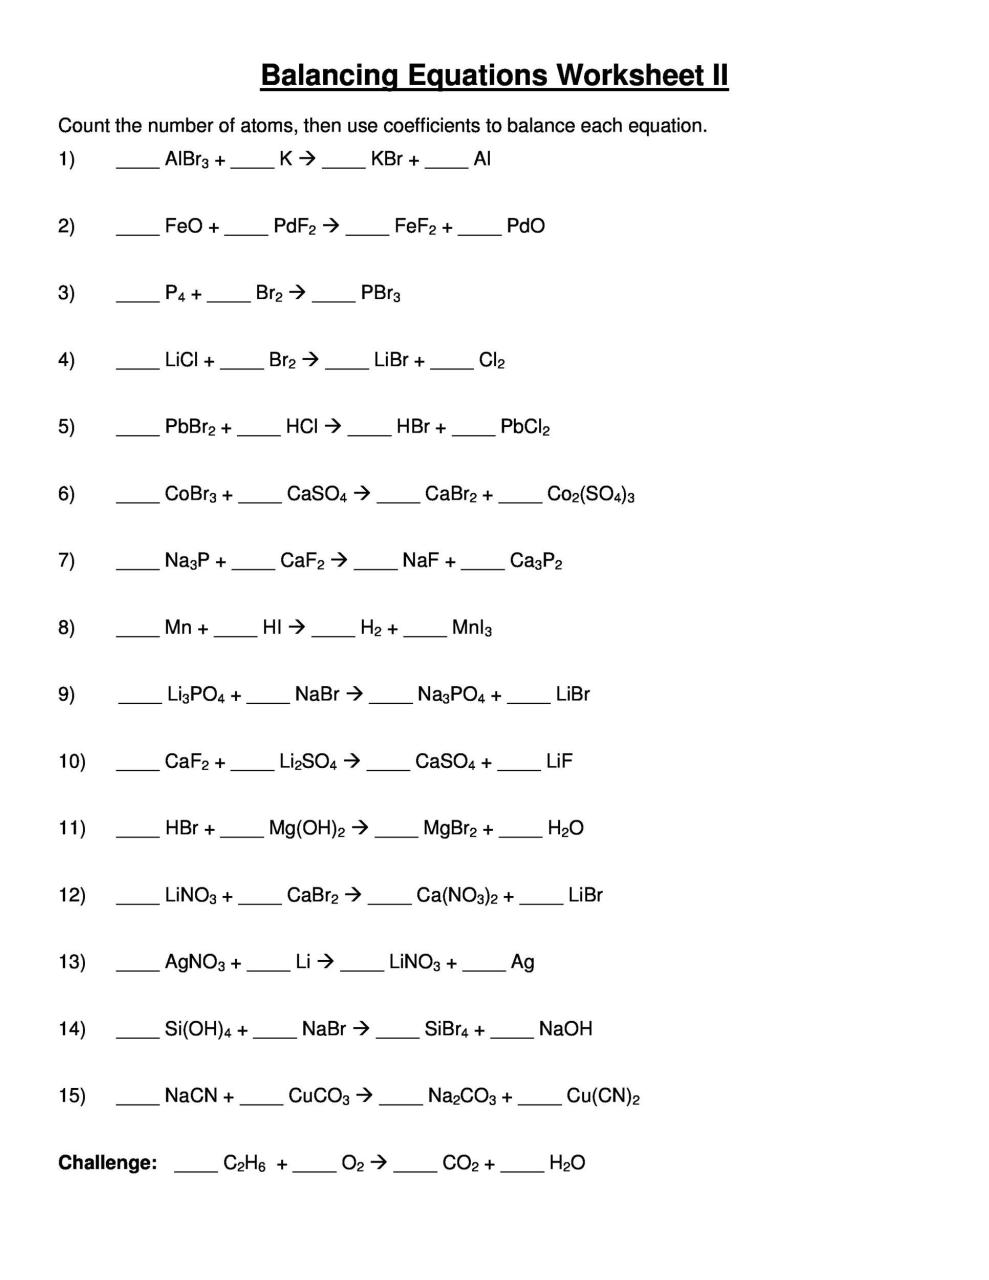 Balancing Equations Practice Problems Worksheet Answer Key + My PDF